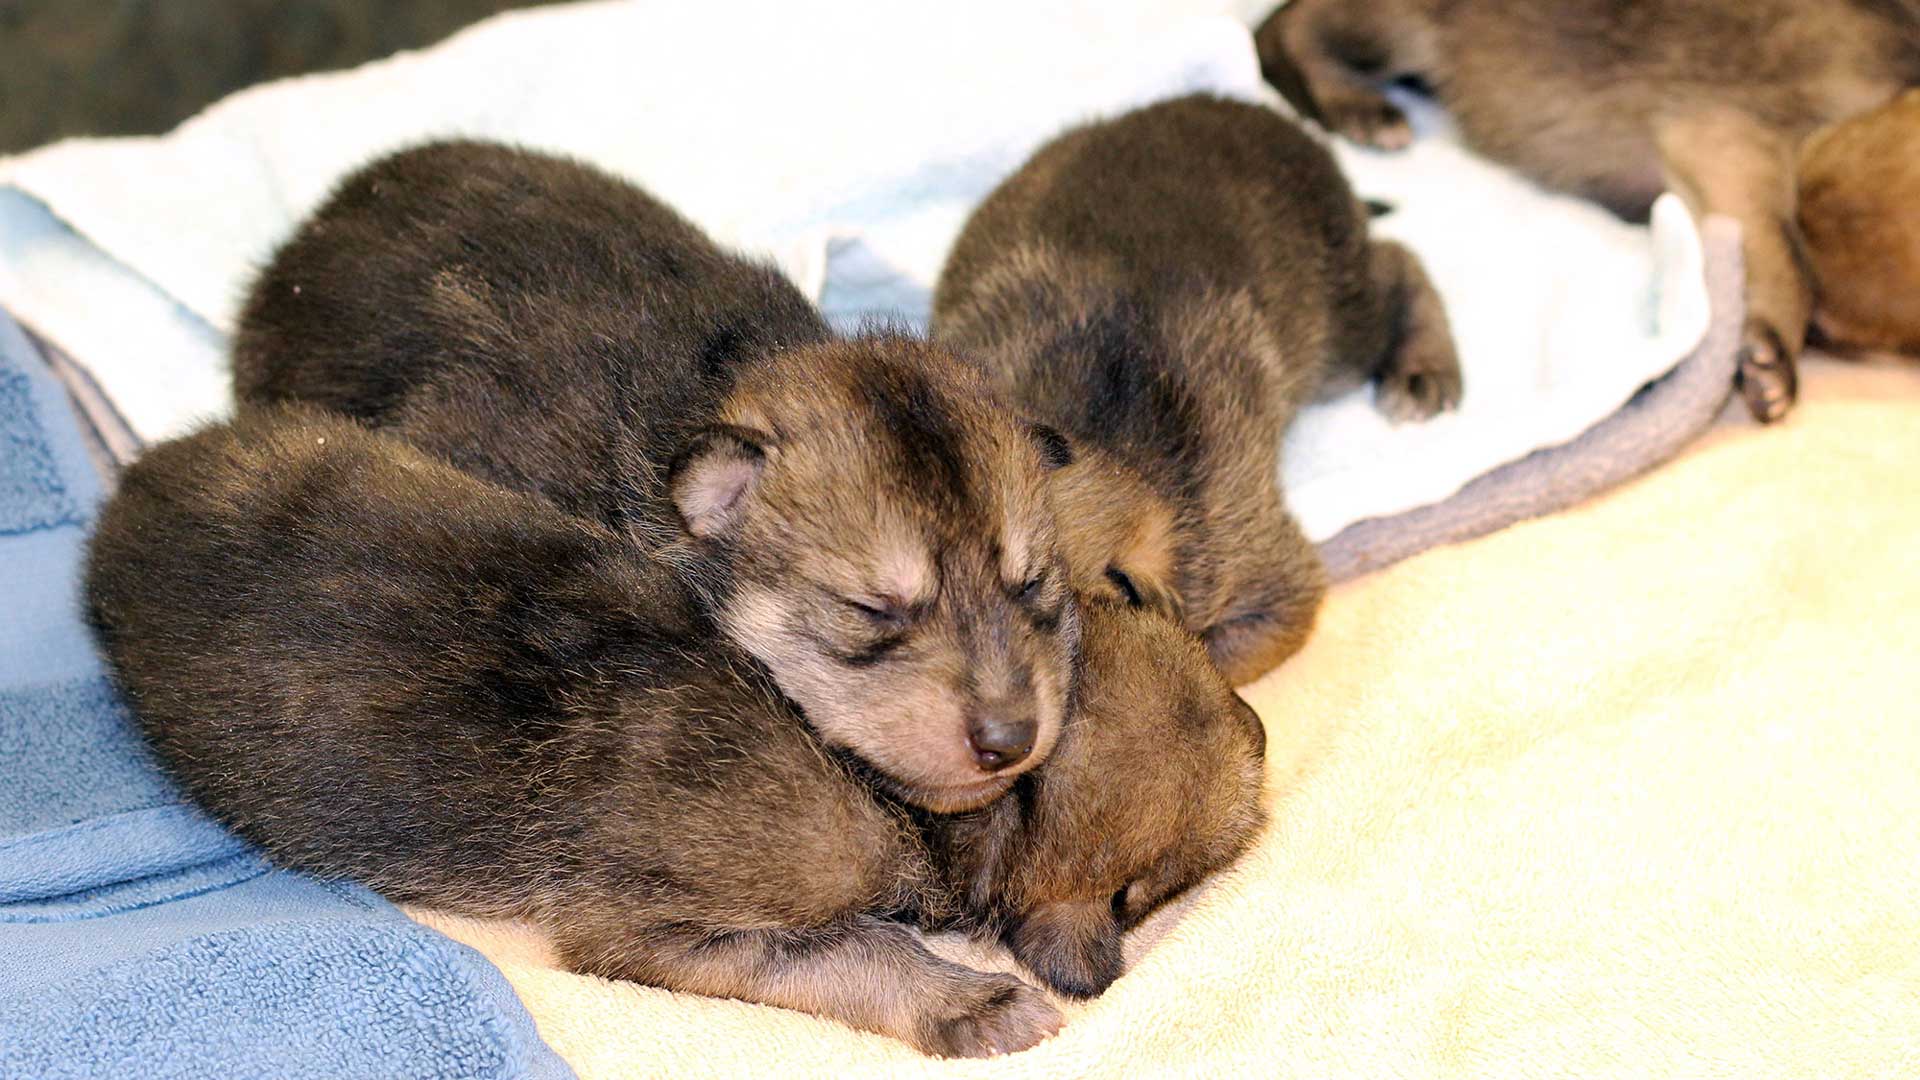 The Mexican gray wolf pups have an affinity to crawl towards each other and their mother for warmth and comfort. The piling reflex is affectionately called a "puppy pile."